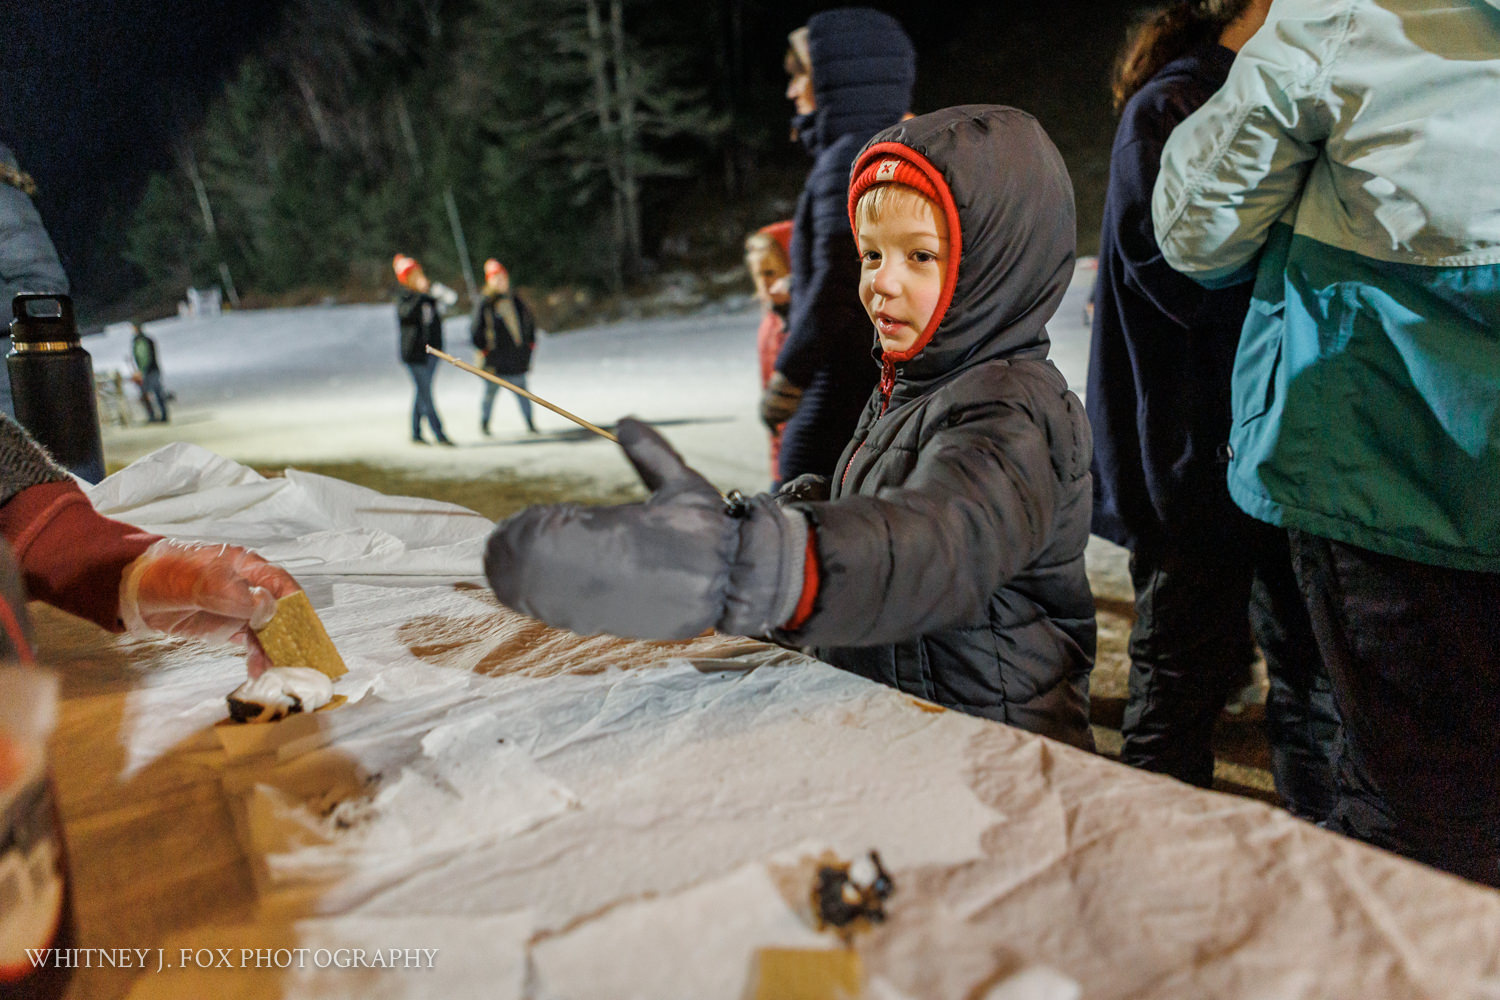 387 winter kids welcome to winter 2022 lost valley auburn maine documentary event photographer whitney j fox 4353 w